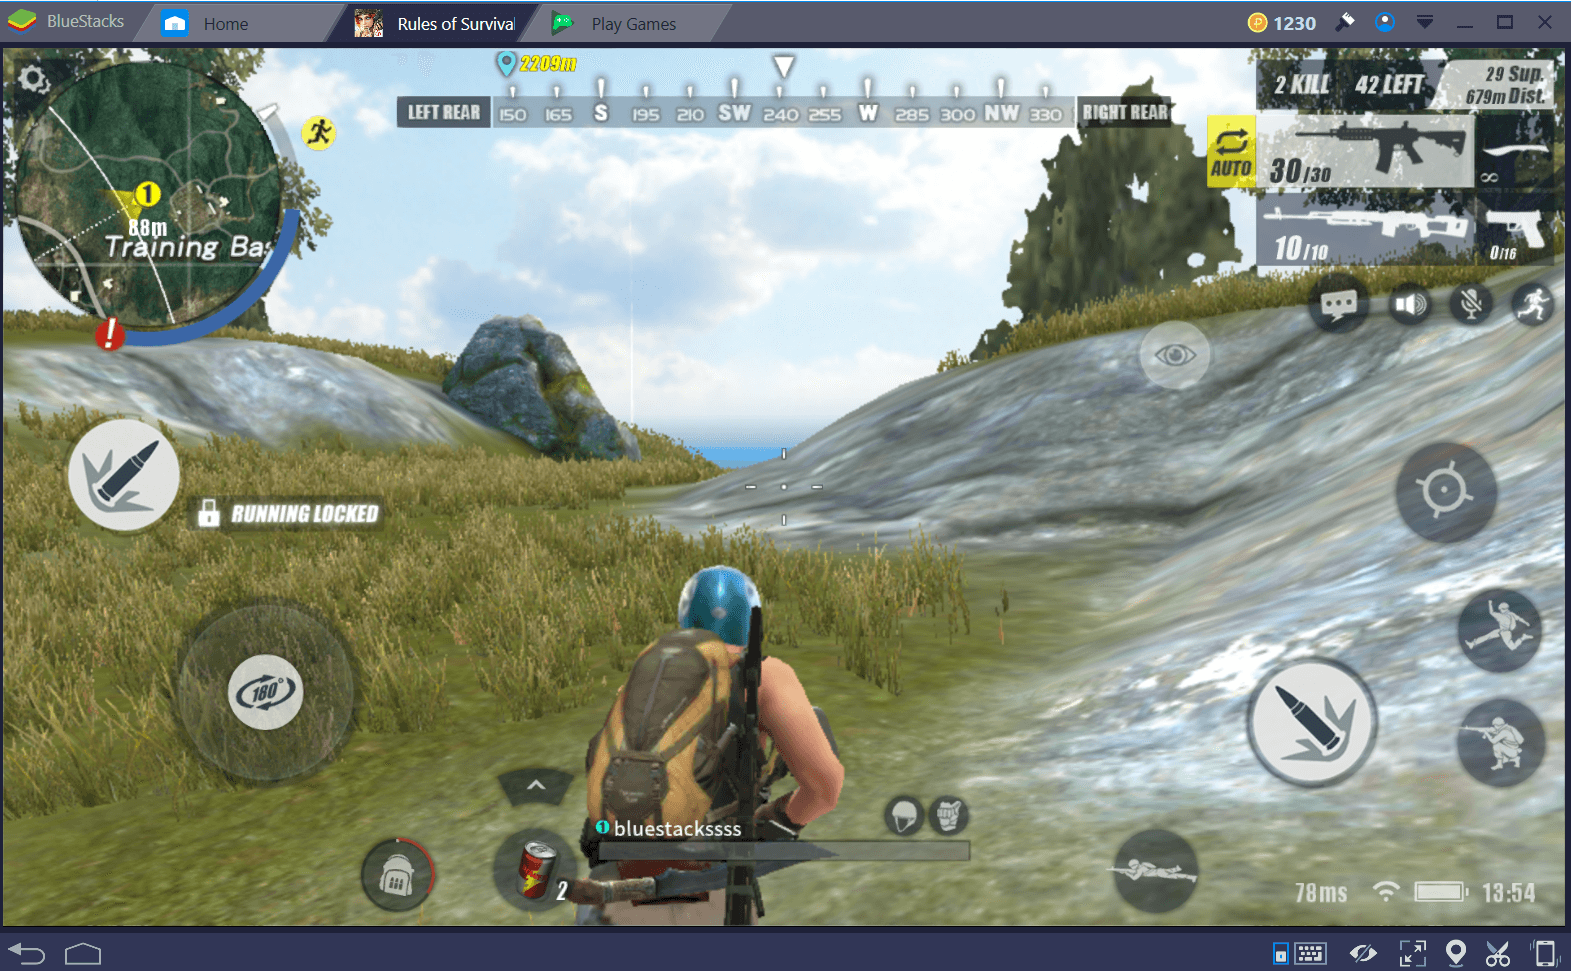 Top Tips For Improving Your Aim When Playing Rules Of Survival